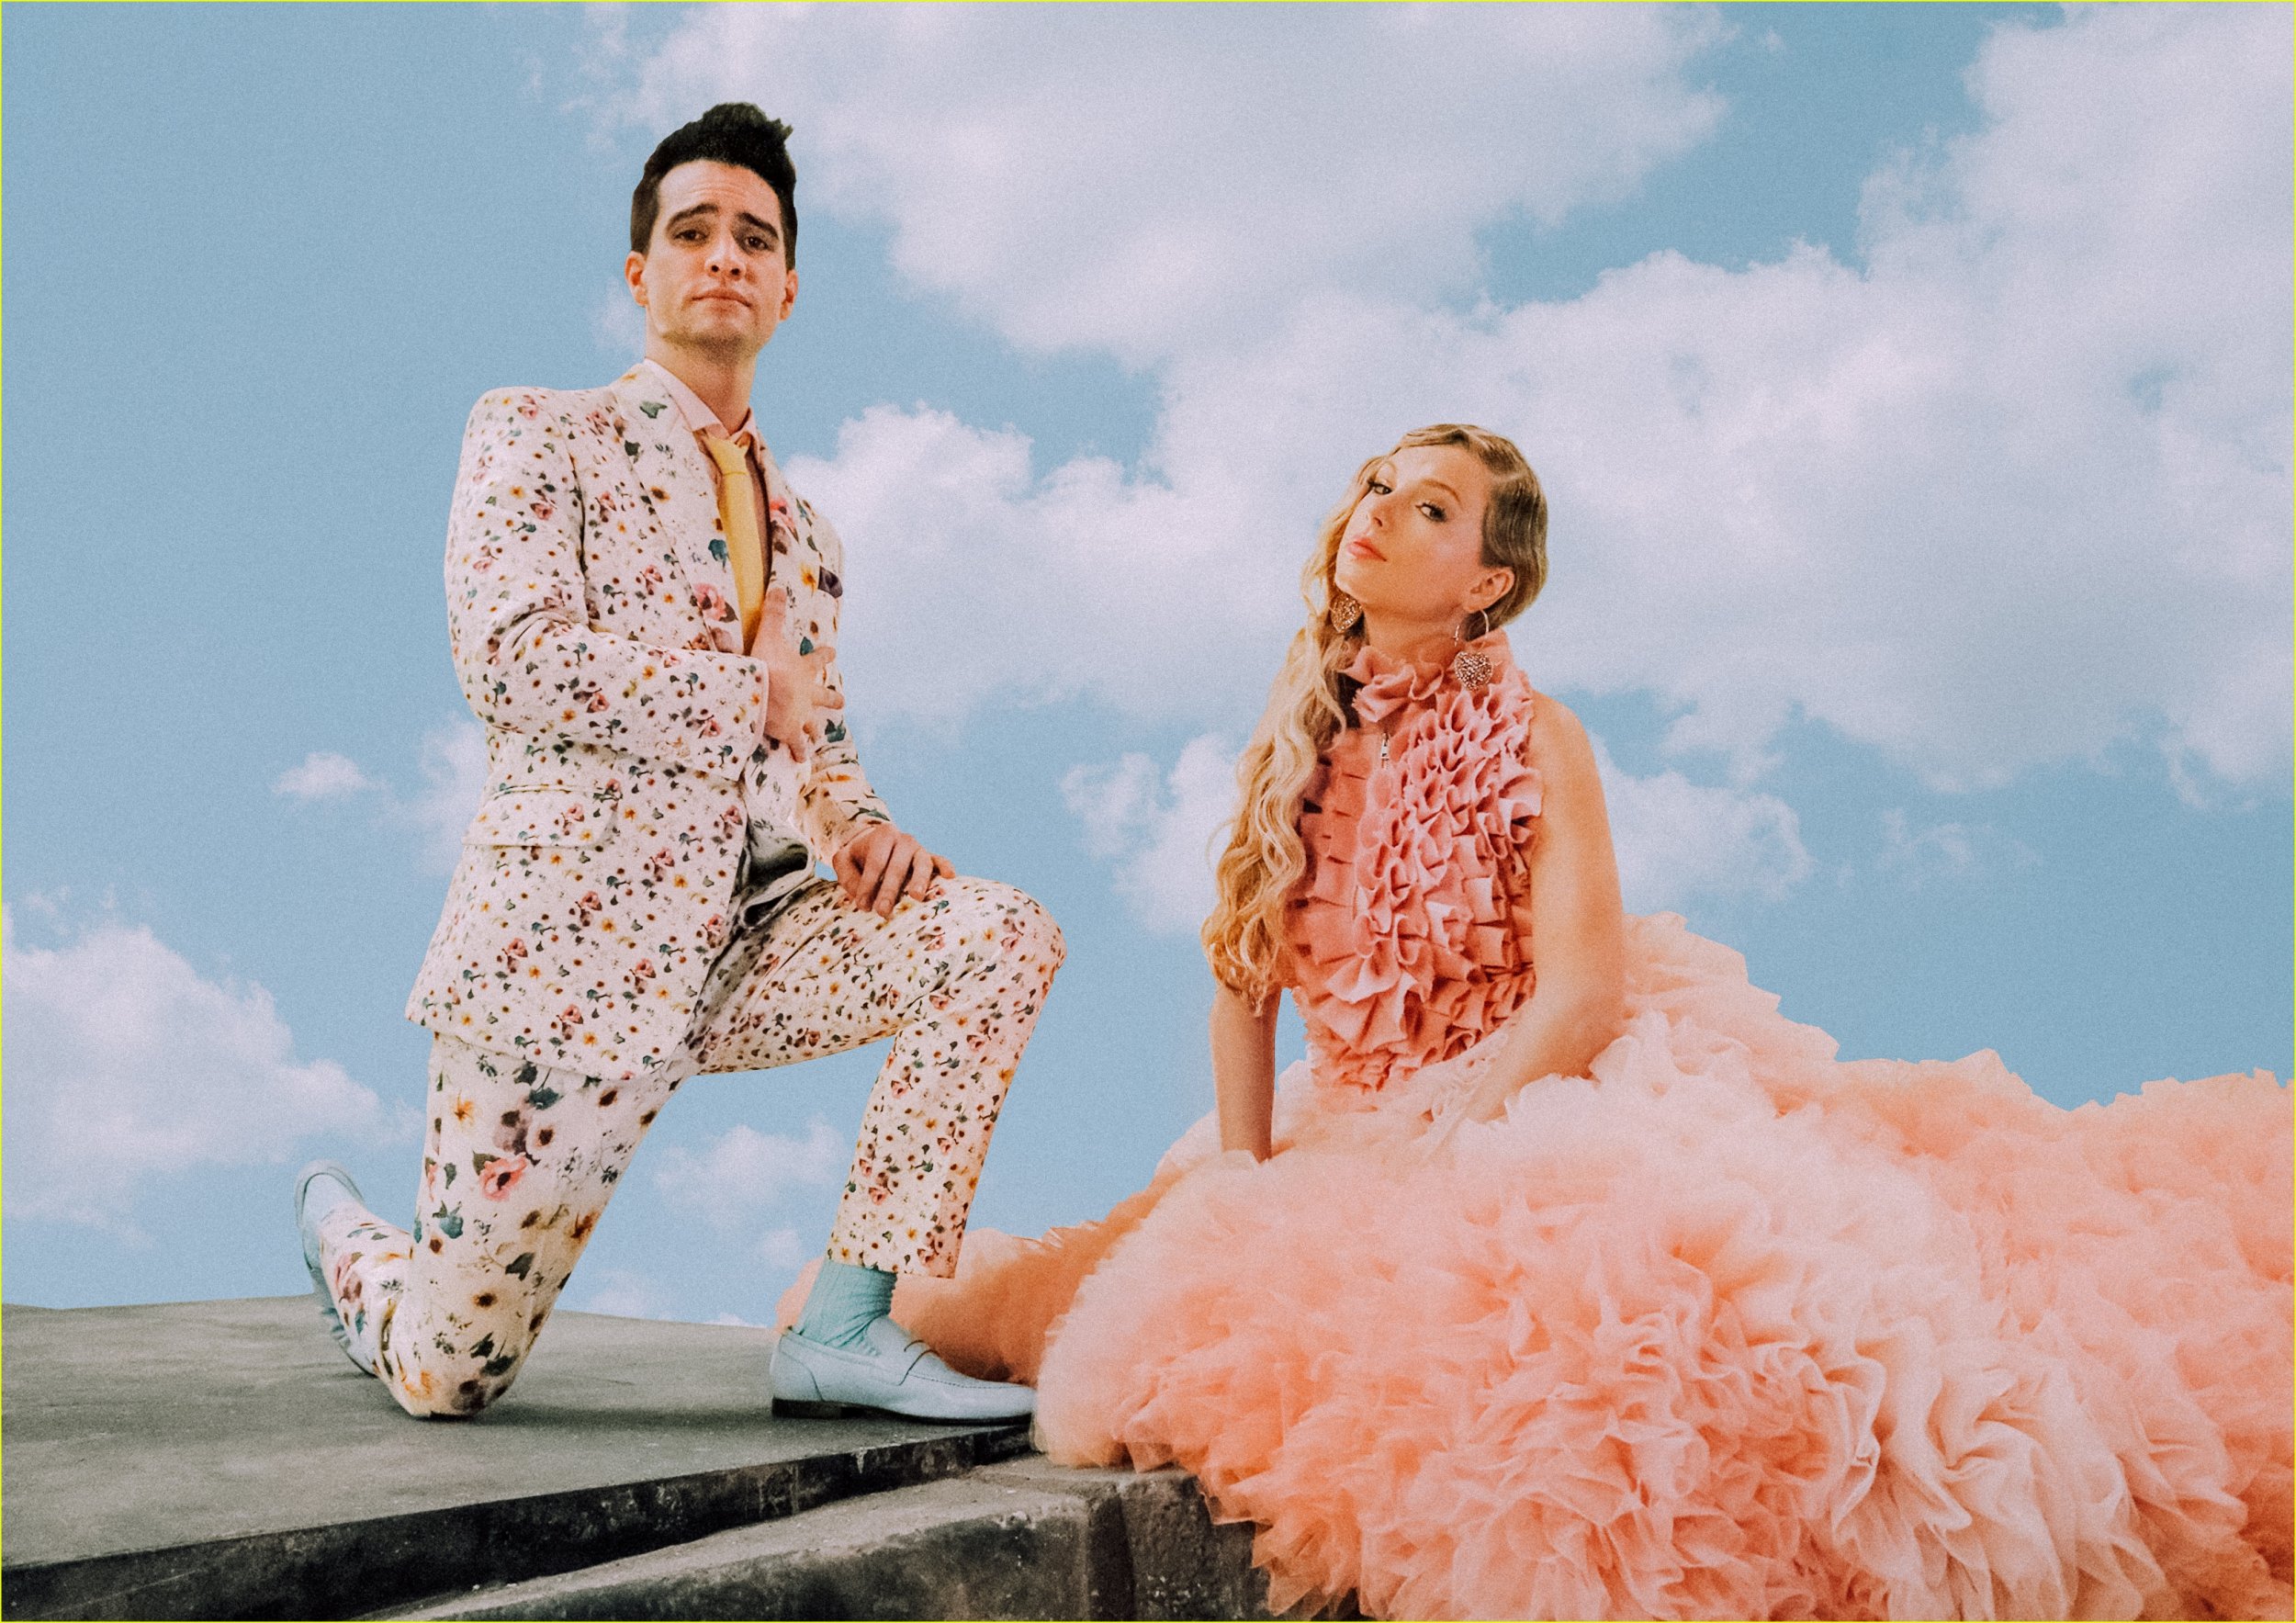 Taylor Swift and Brendon Urie © Valheria Rocha